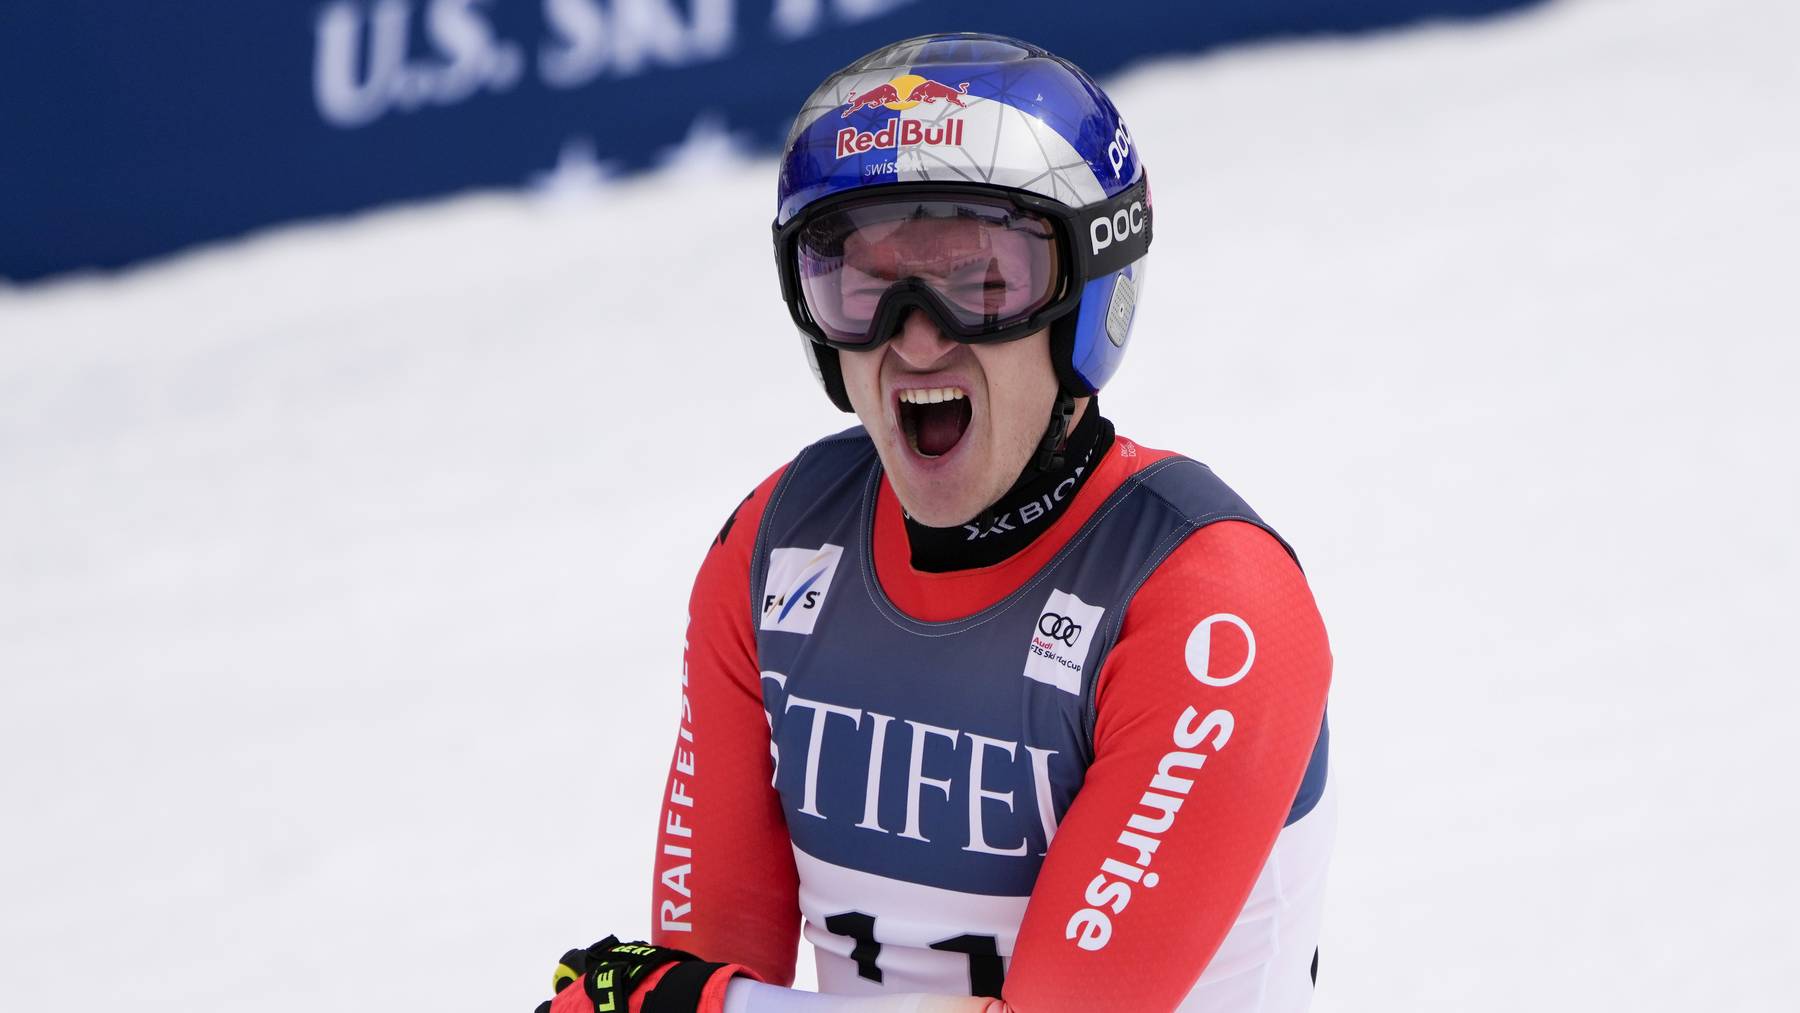 Switzerland's Marco Odermatt celebrates after finishing his run during a men's World Cup downhill skiing race Saturday, March 4, 2023, in Aspen, Colo.